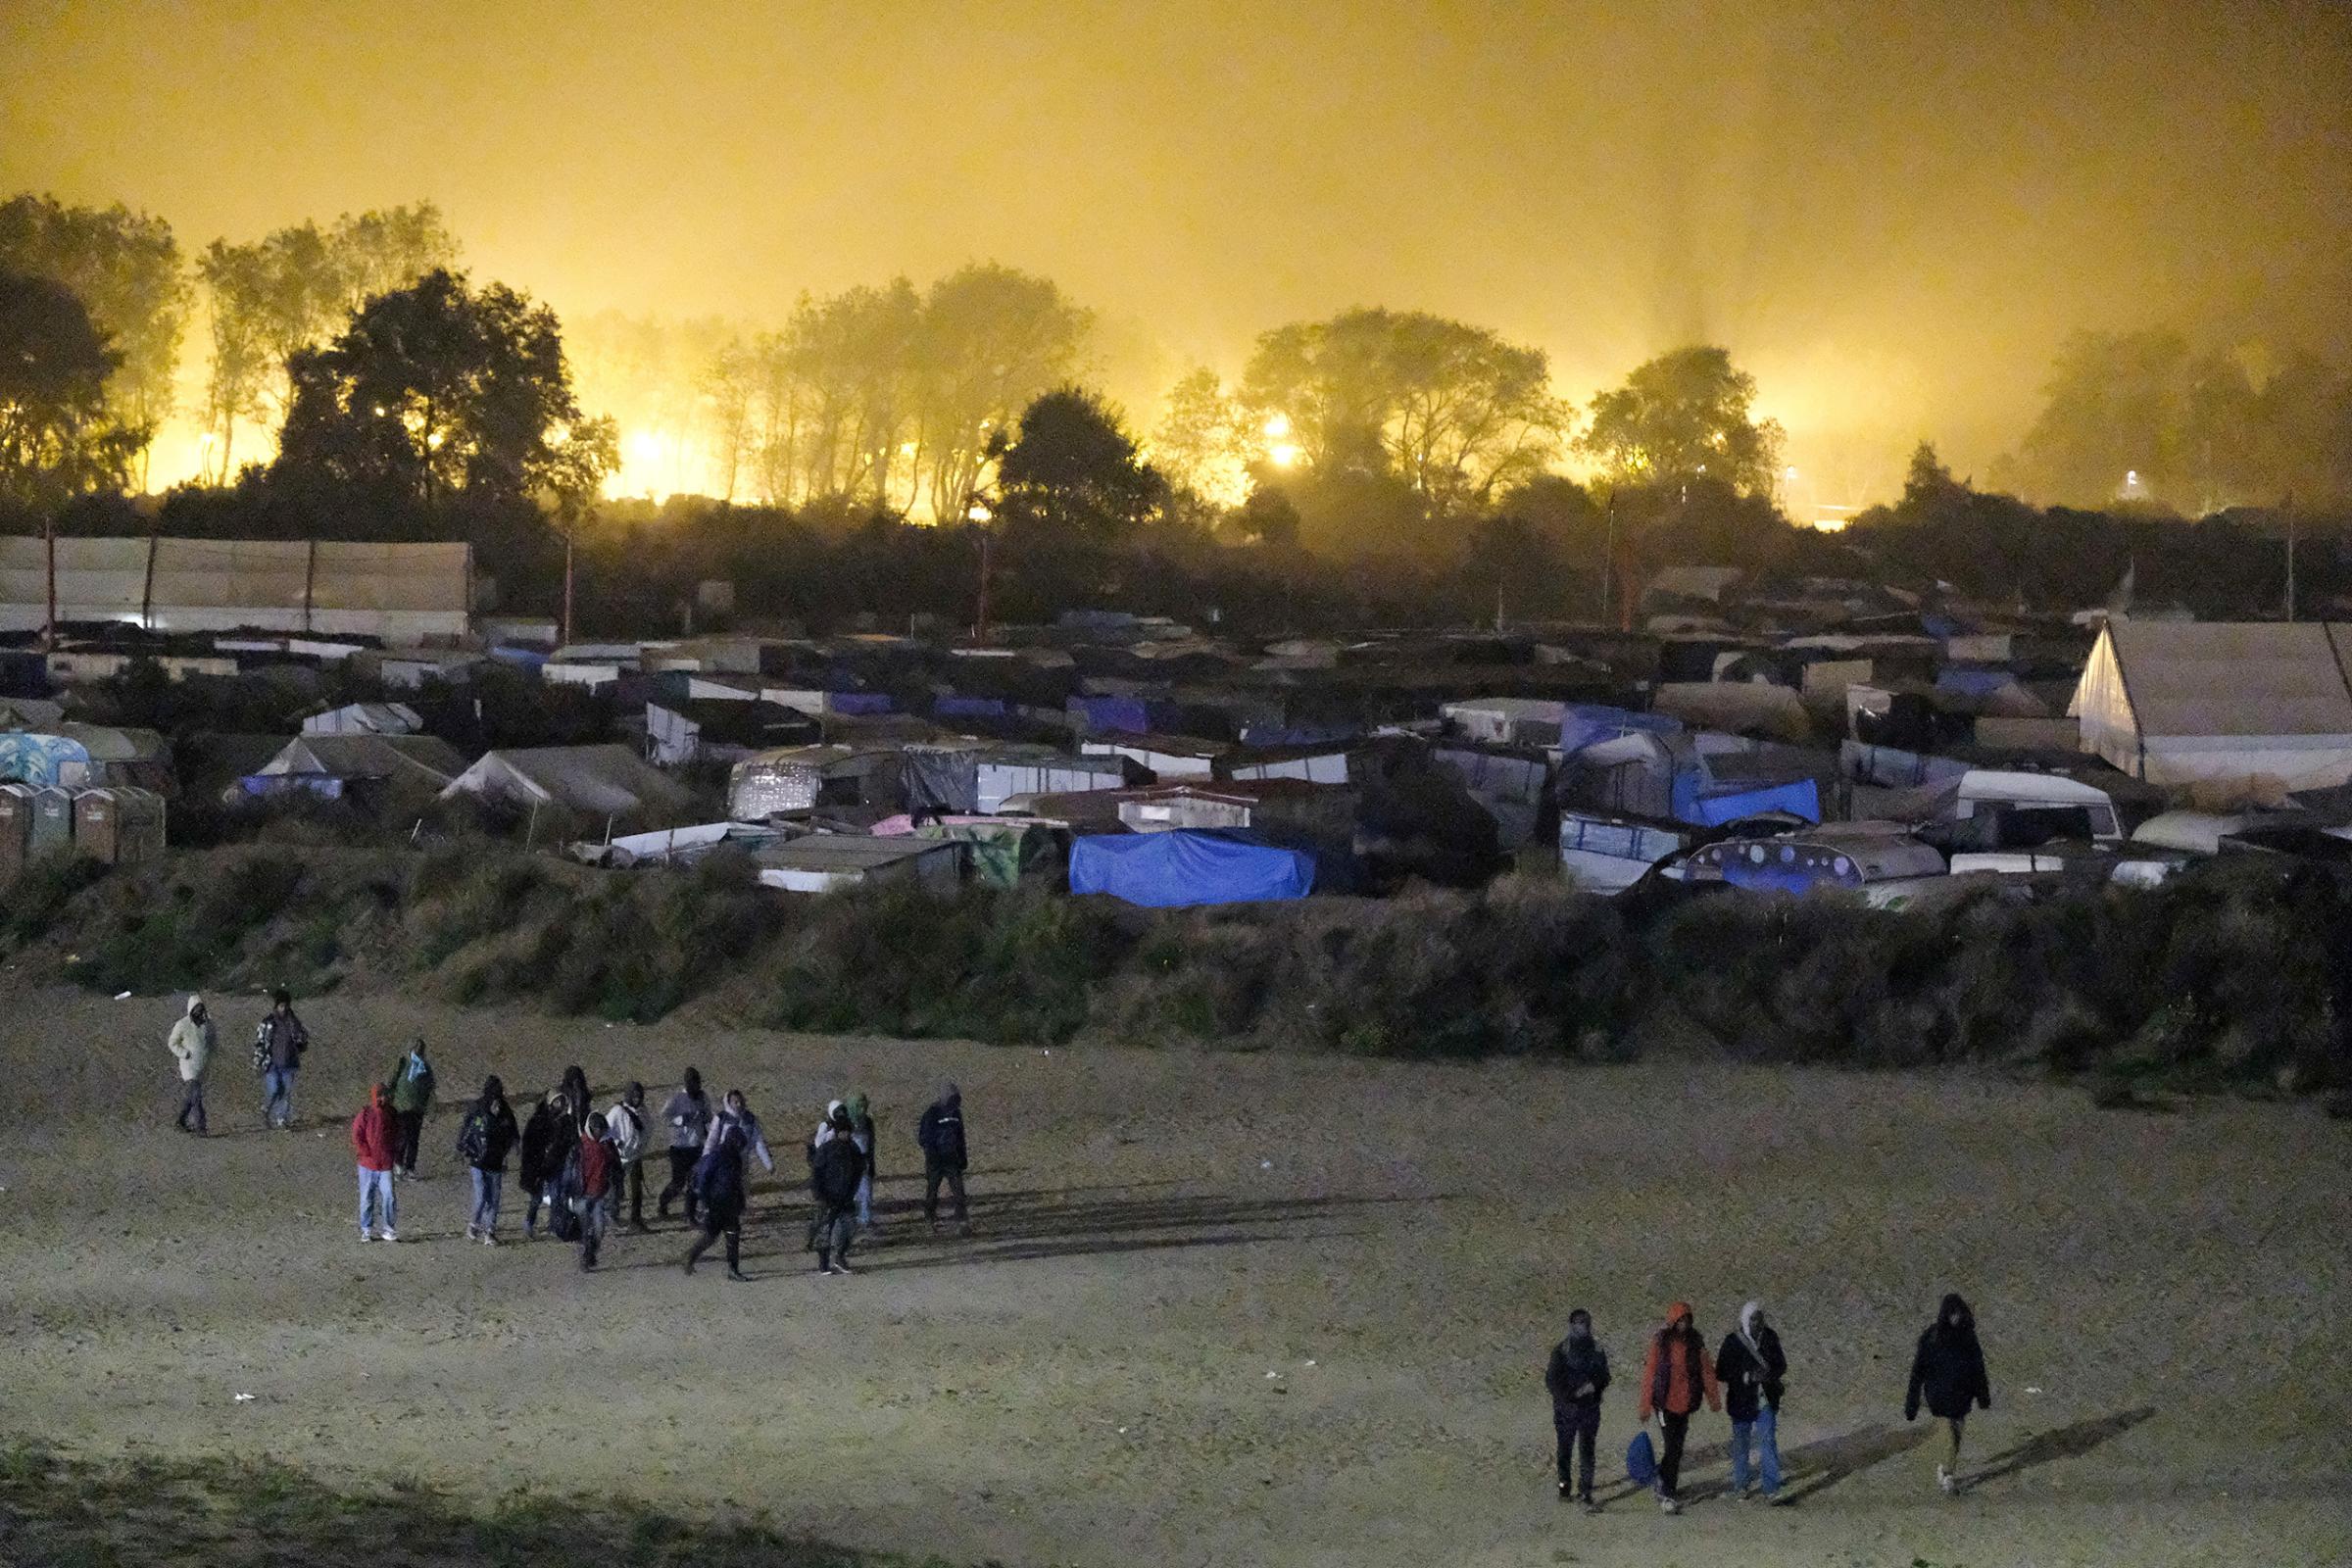 Migrants begin to leave the squalid "Jungle" camp, which authorities began to dismantle this week in a bid to move thousands of inhabitants elsewhere, in Calais, northern France, on Oct. 24, 2016.